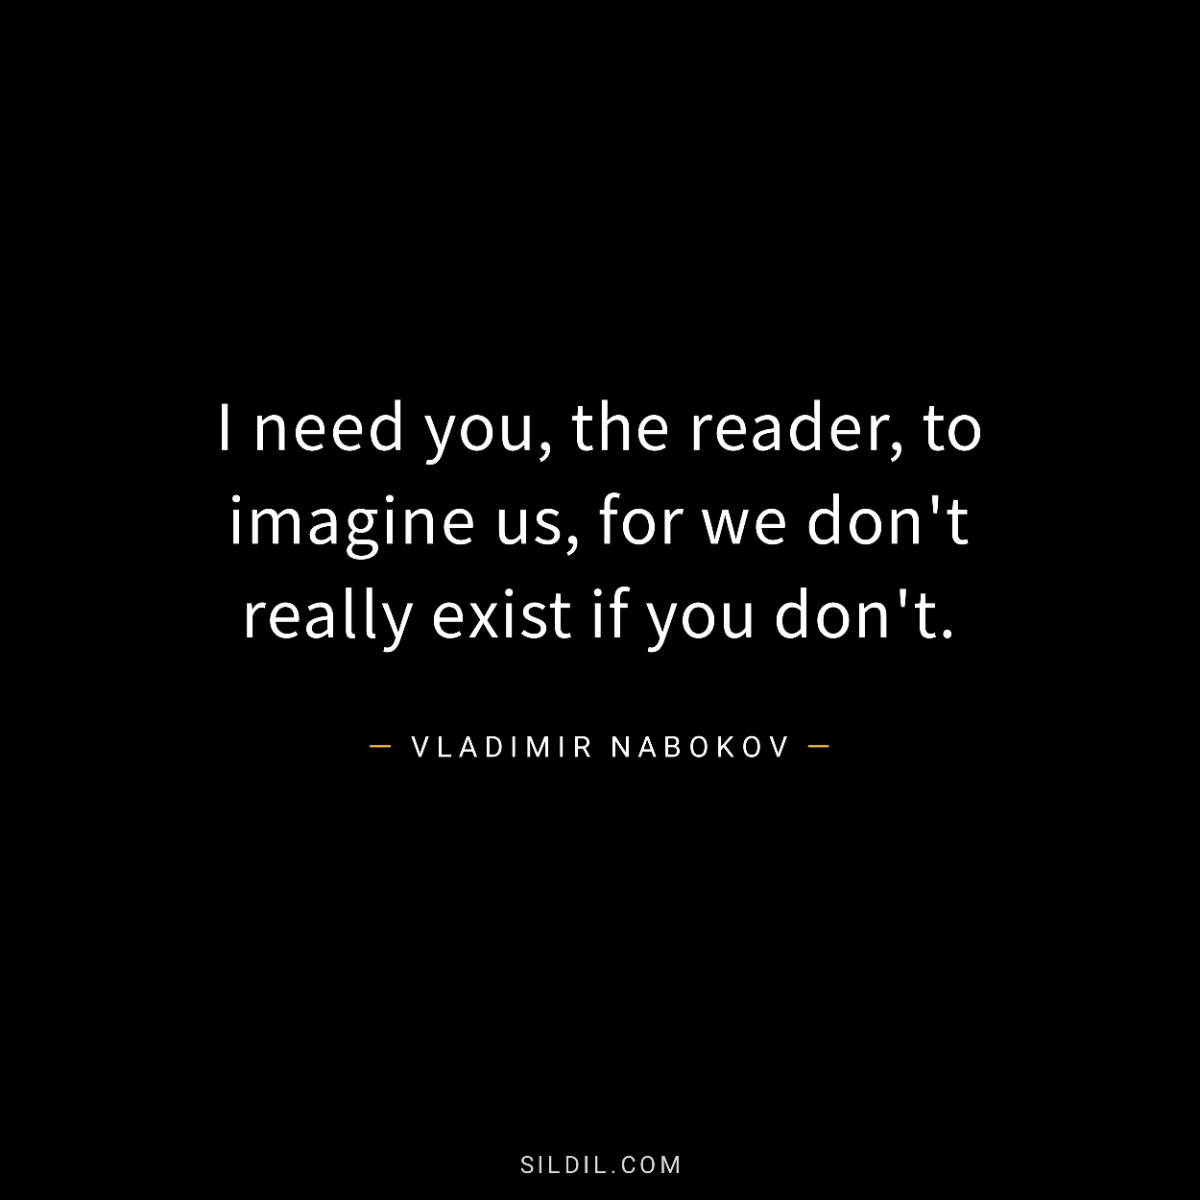 I need you, the reader, to imagine us, for we don't really exist if you don't.